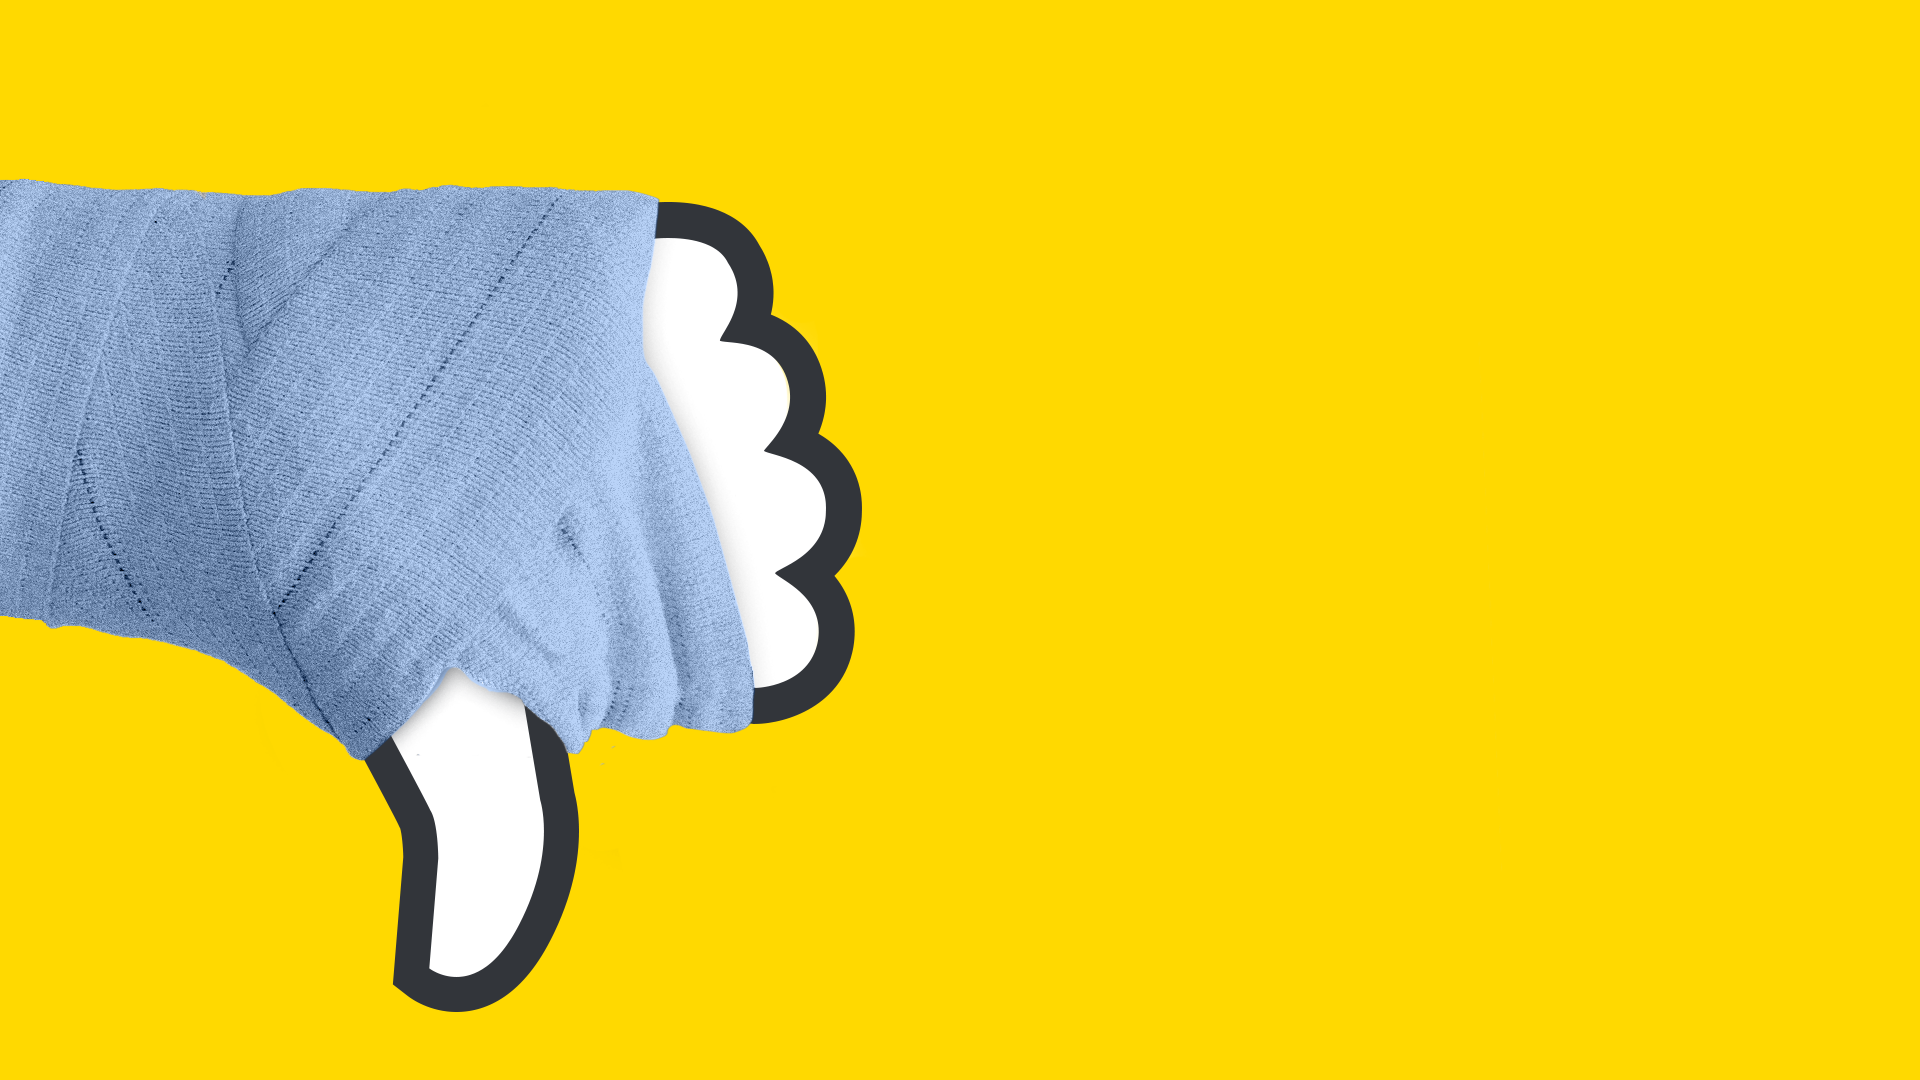 An illustration of a Facebook thumb pointed down with a bandage on it